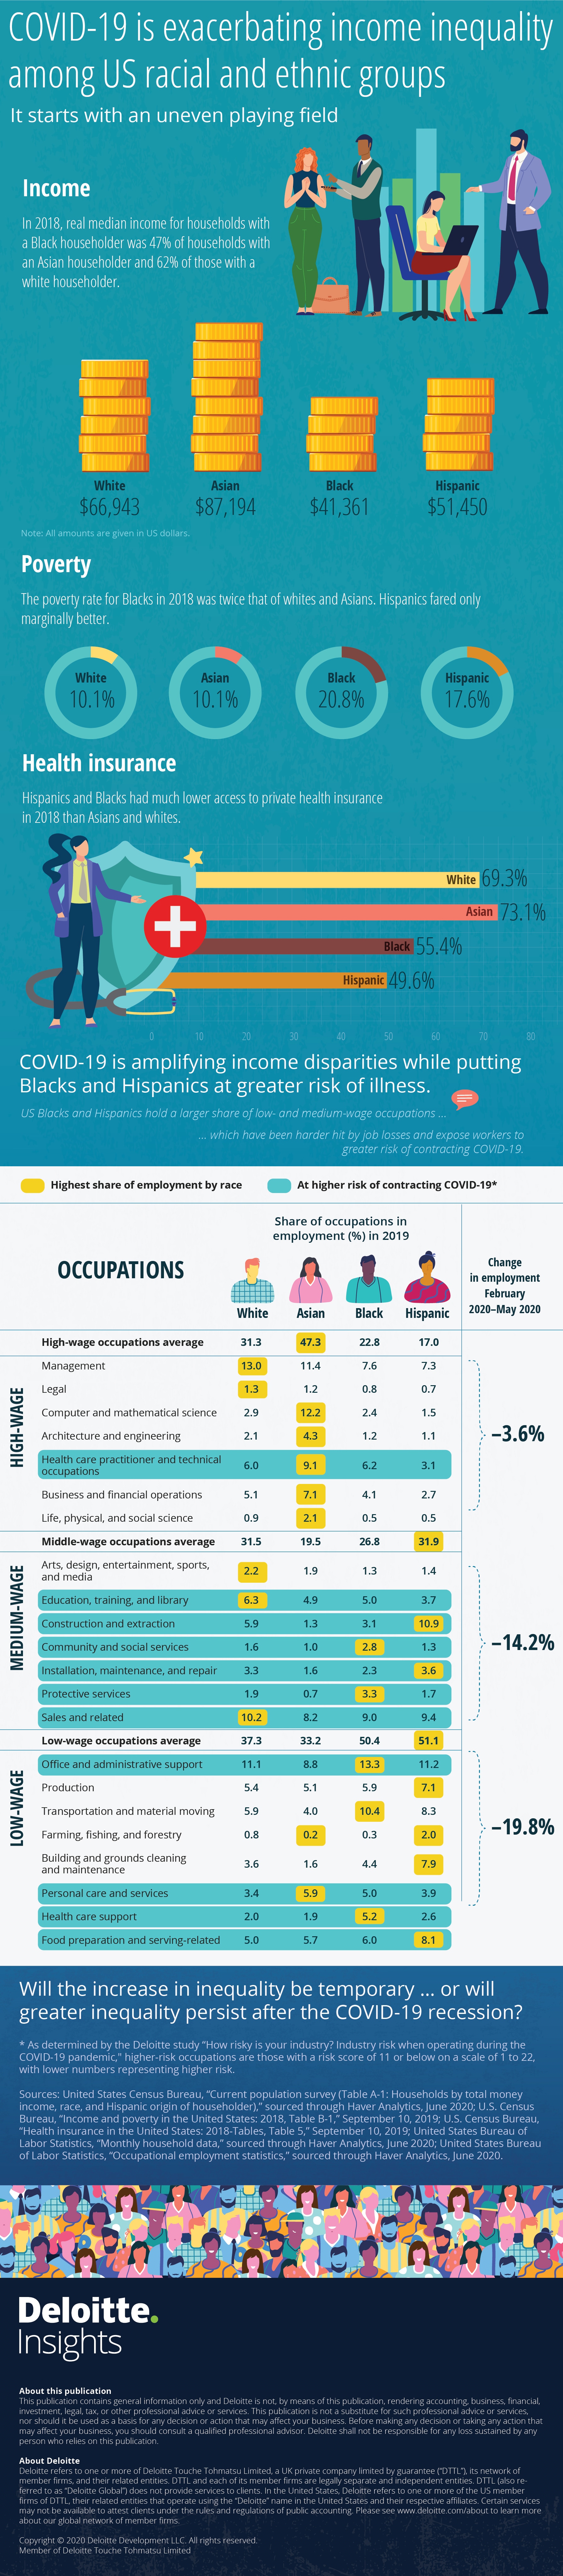 COVID-19’s impact on US income inequality